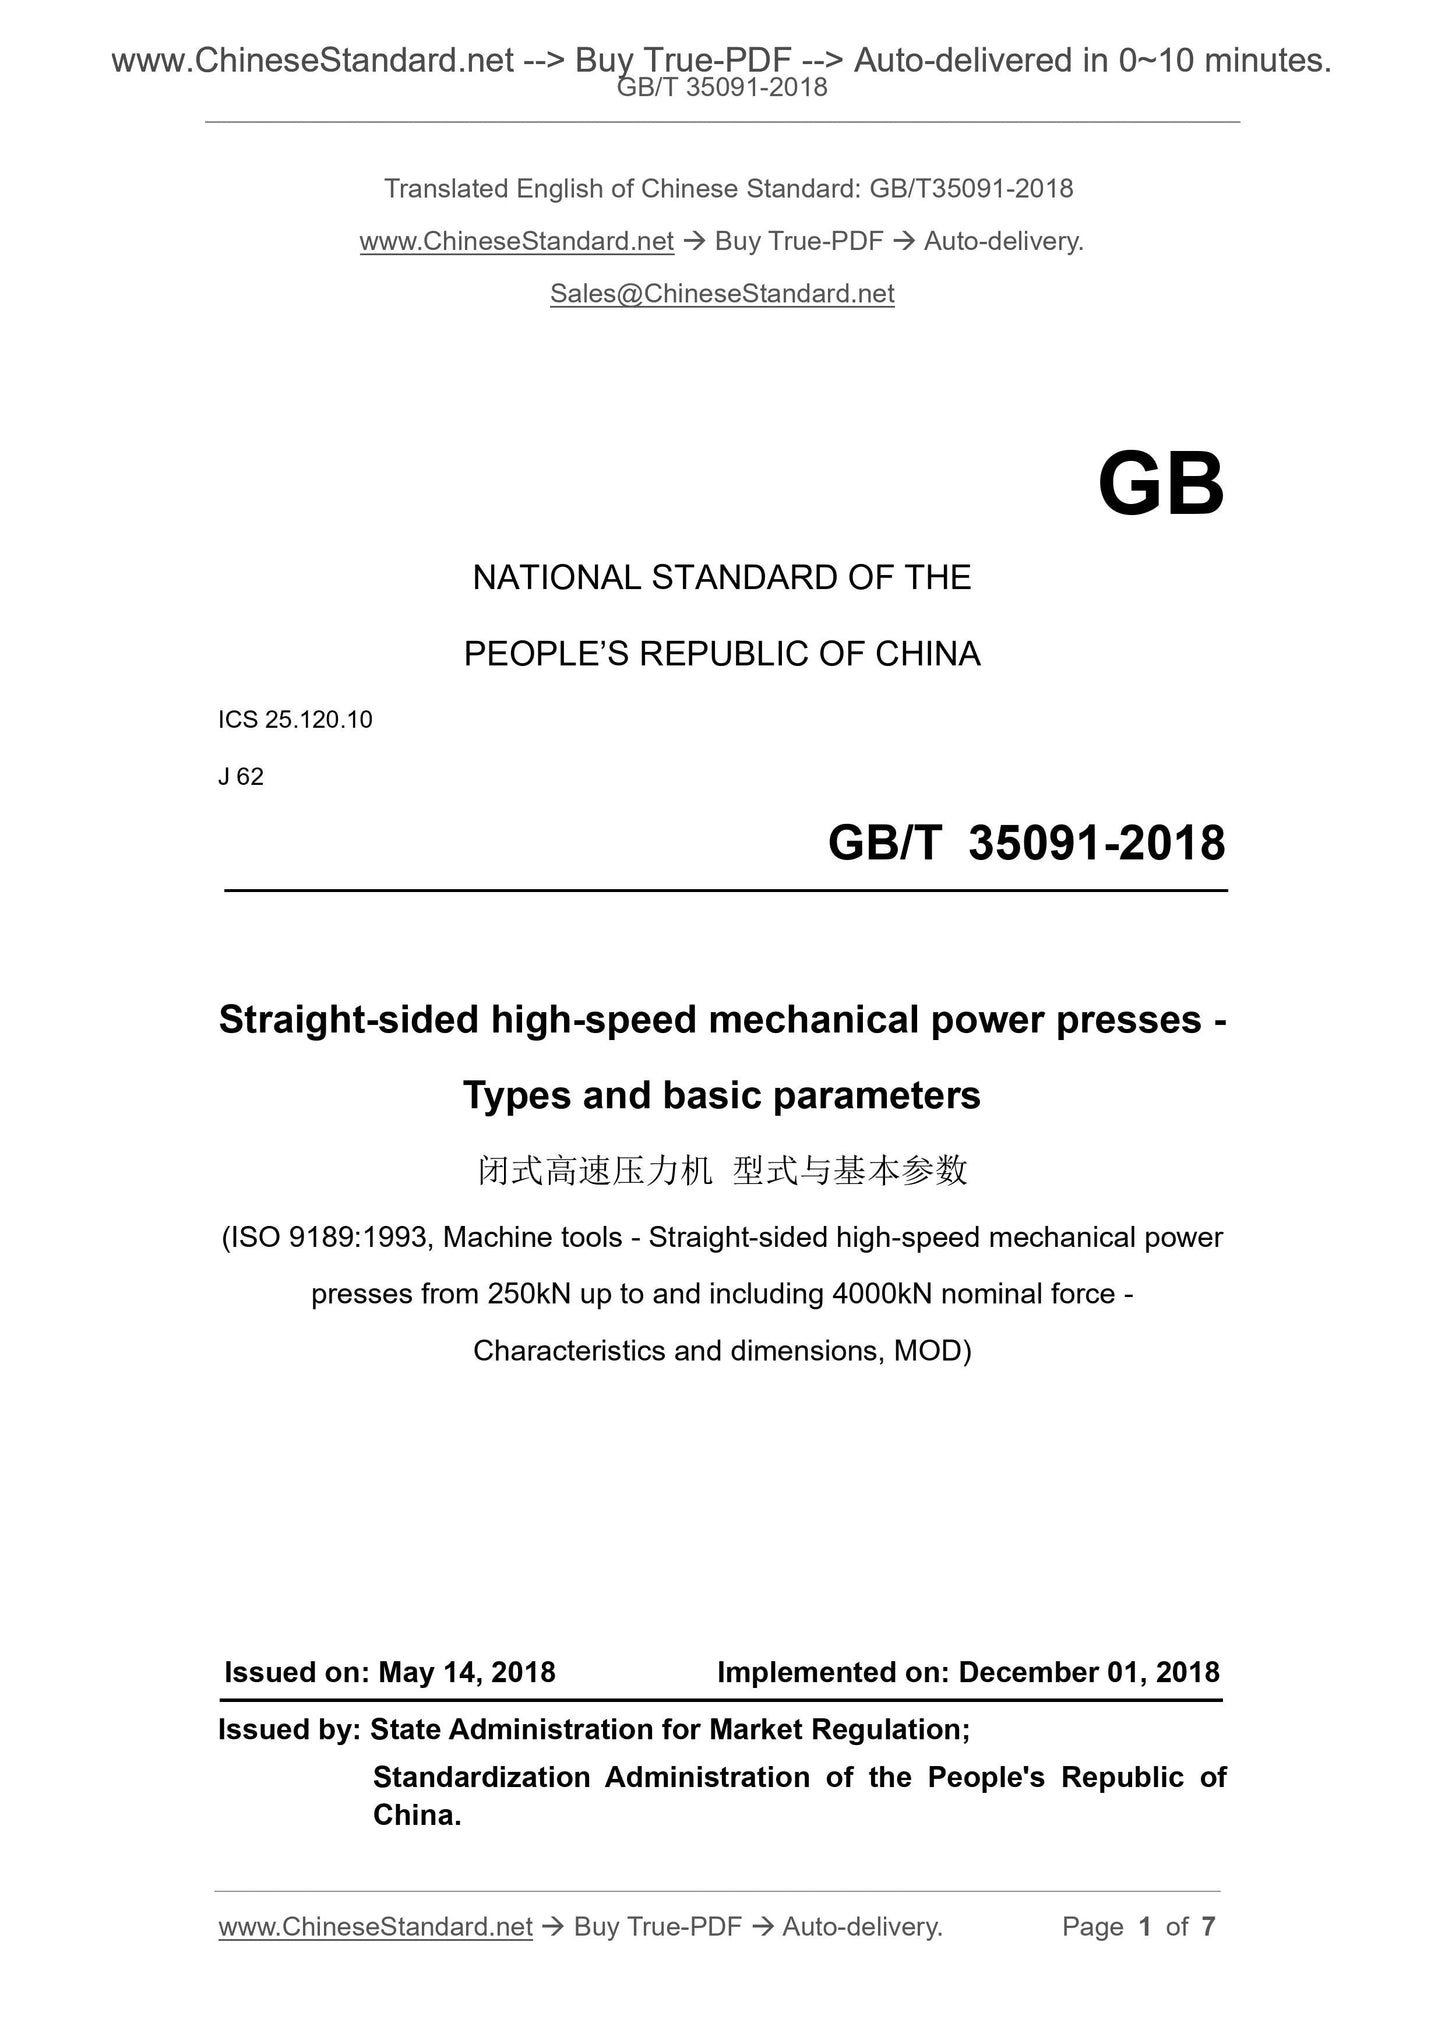 GB/T 35091-2018 Page 1